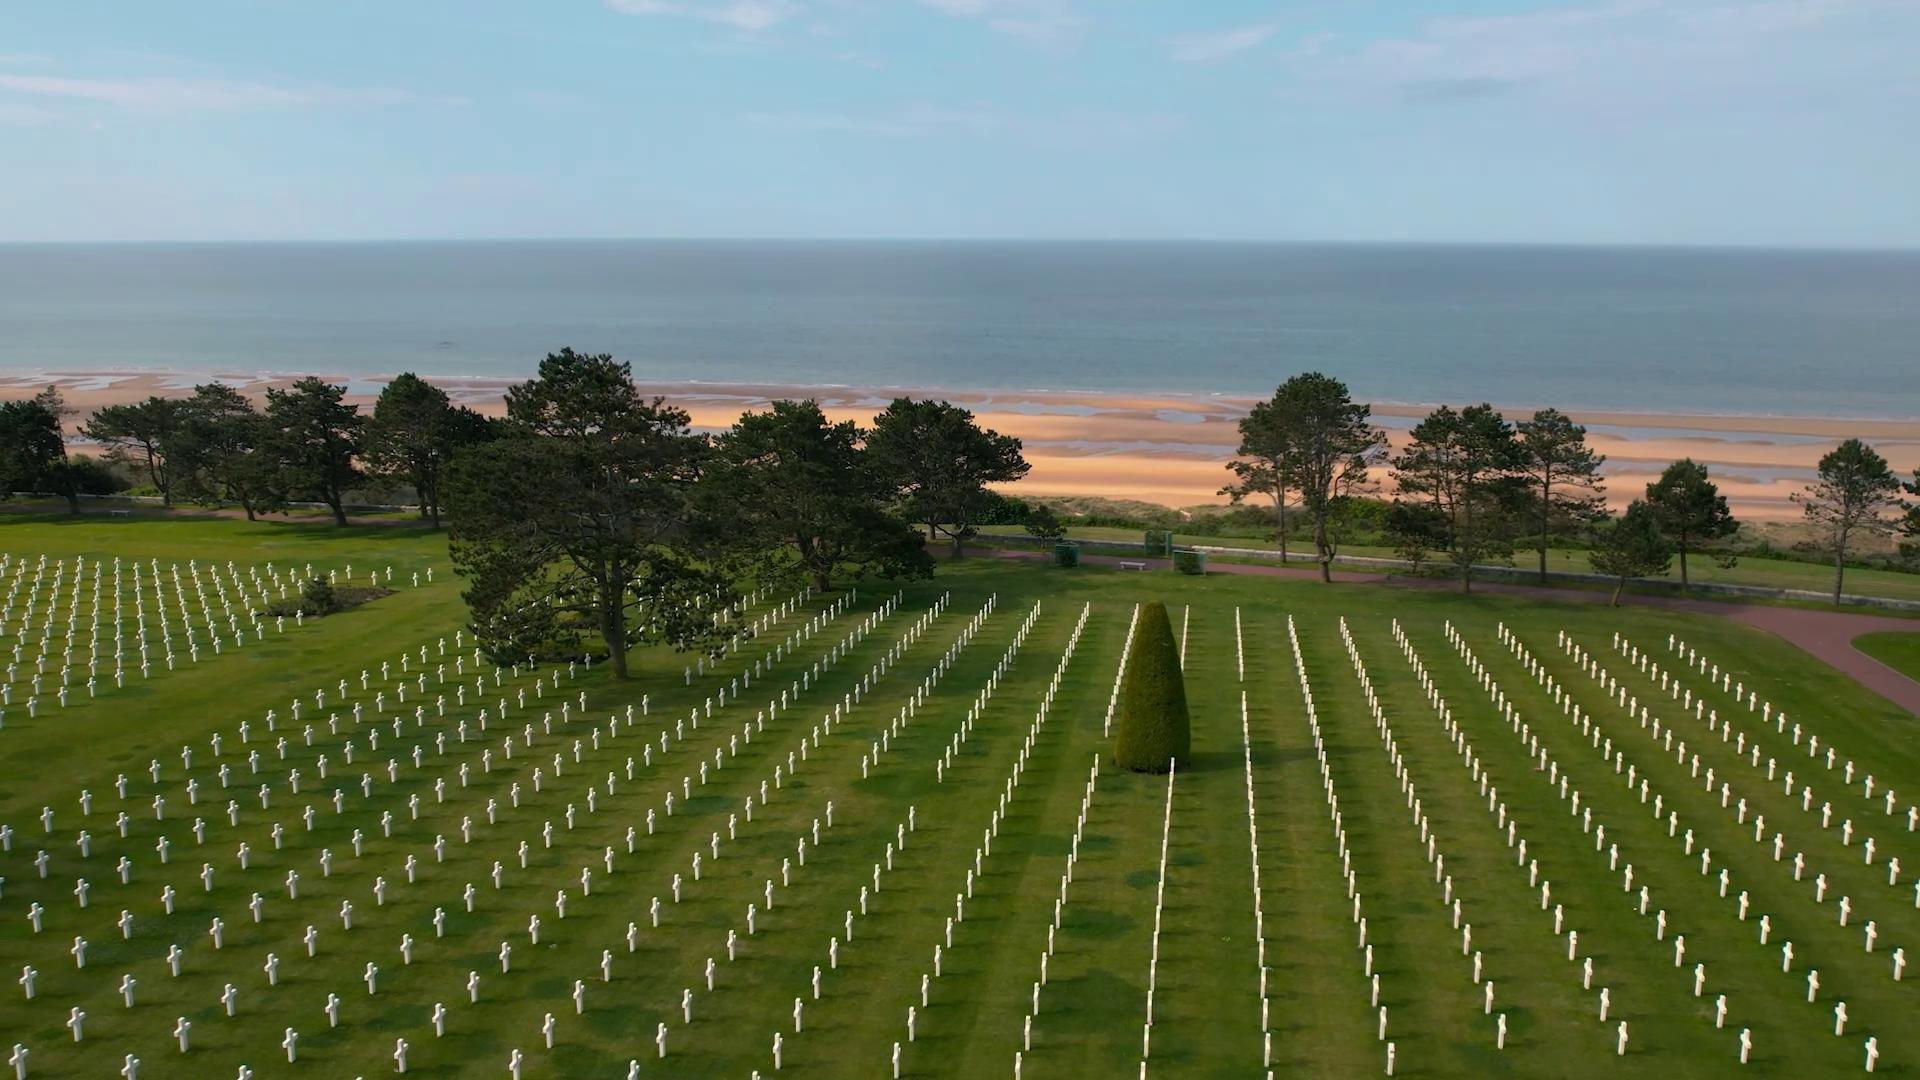 Drone footage from the American cemetery in Normandy.